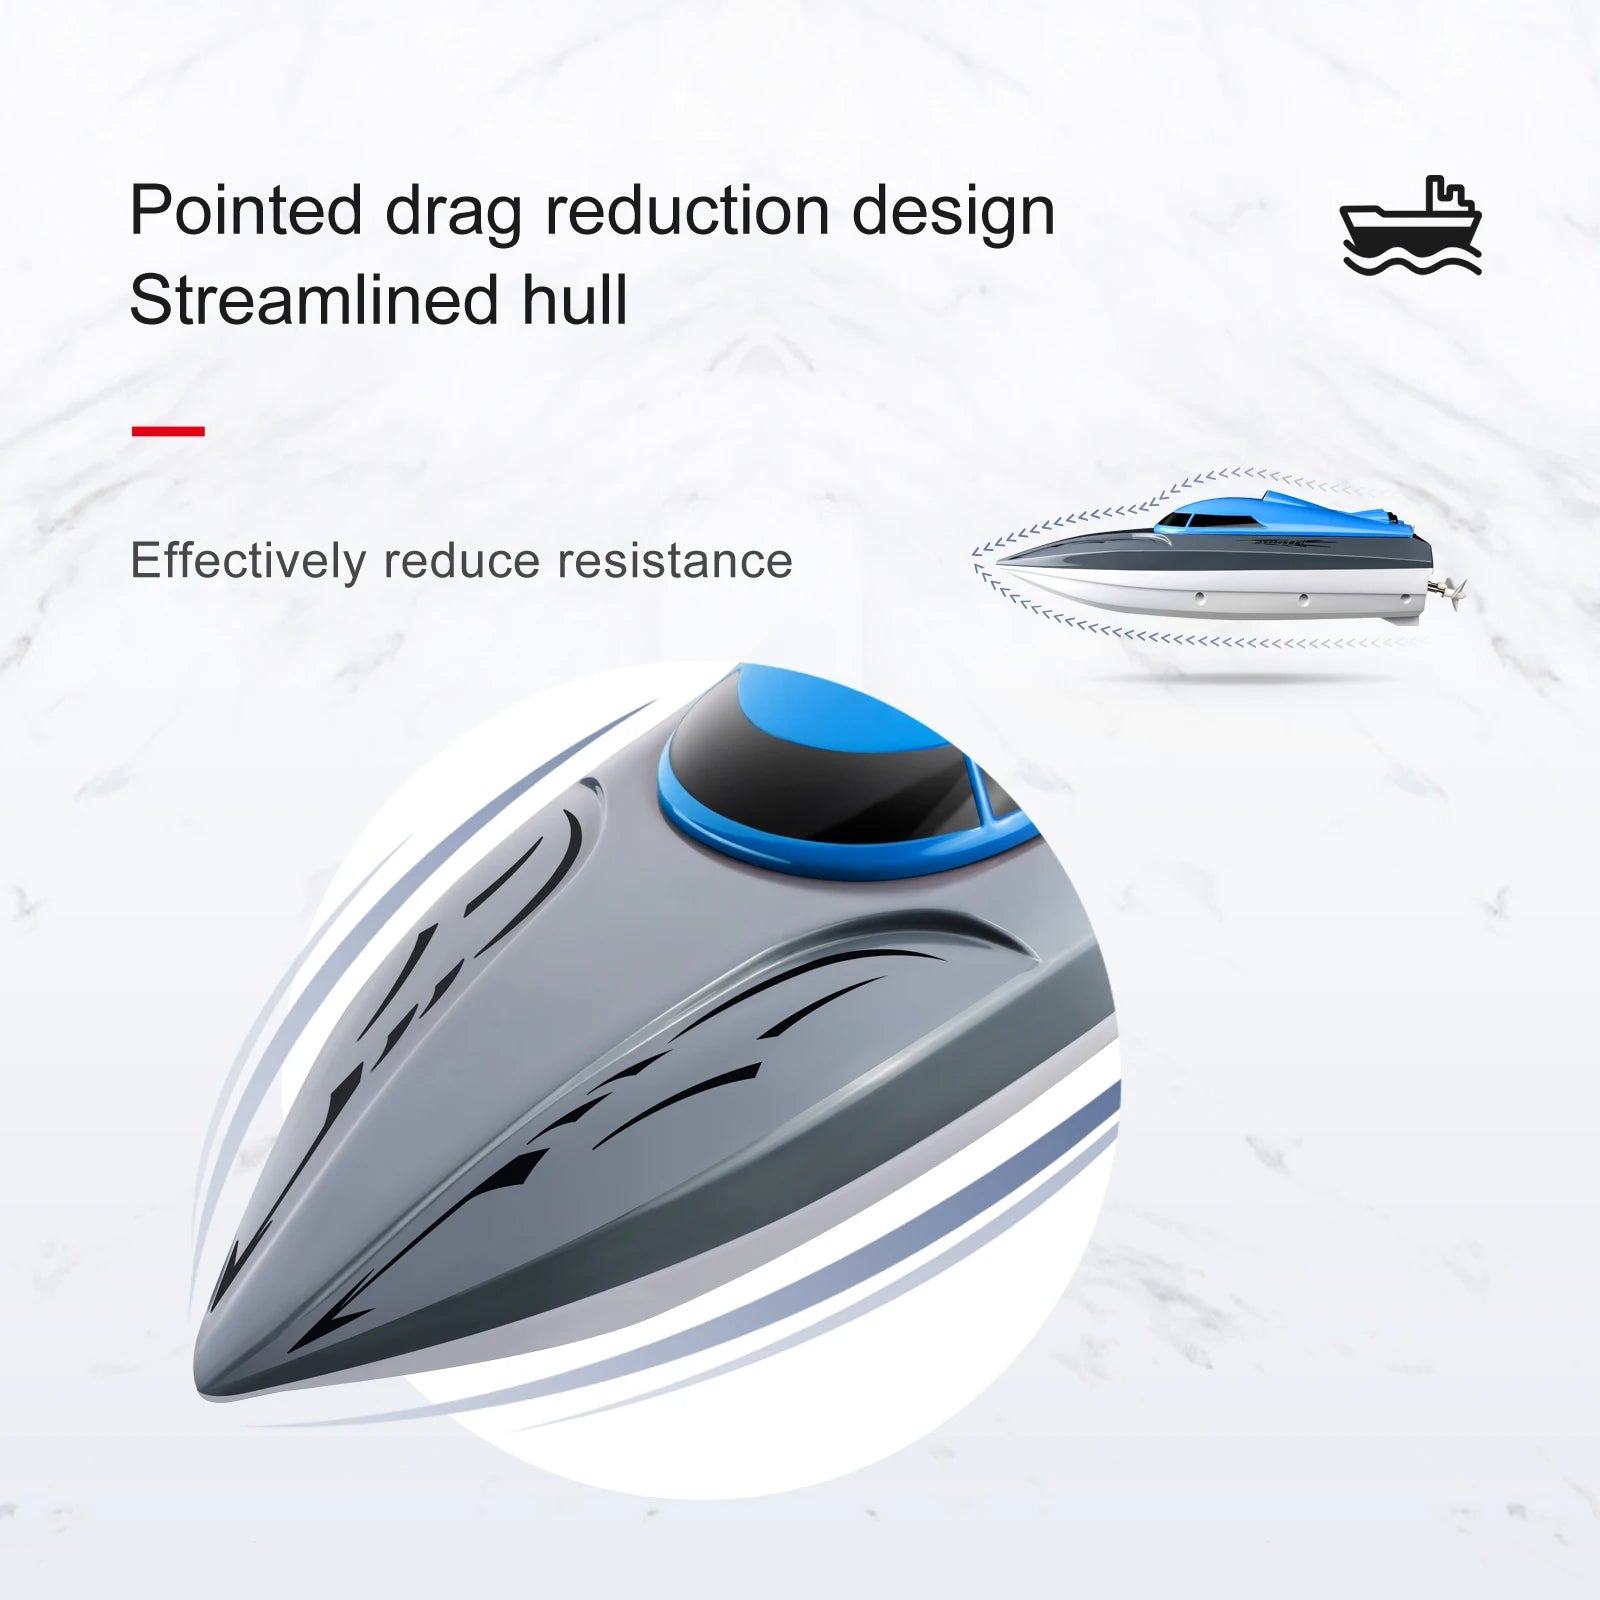 Rc Boat, pointed drag reduction design Streamlined hull Effectively reduce resistance L4